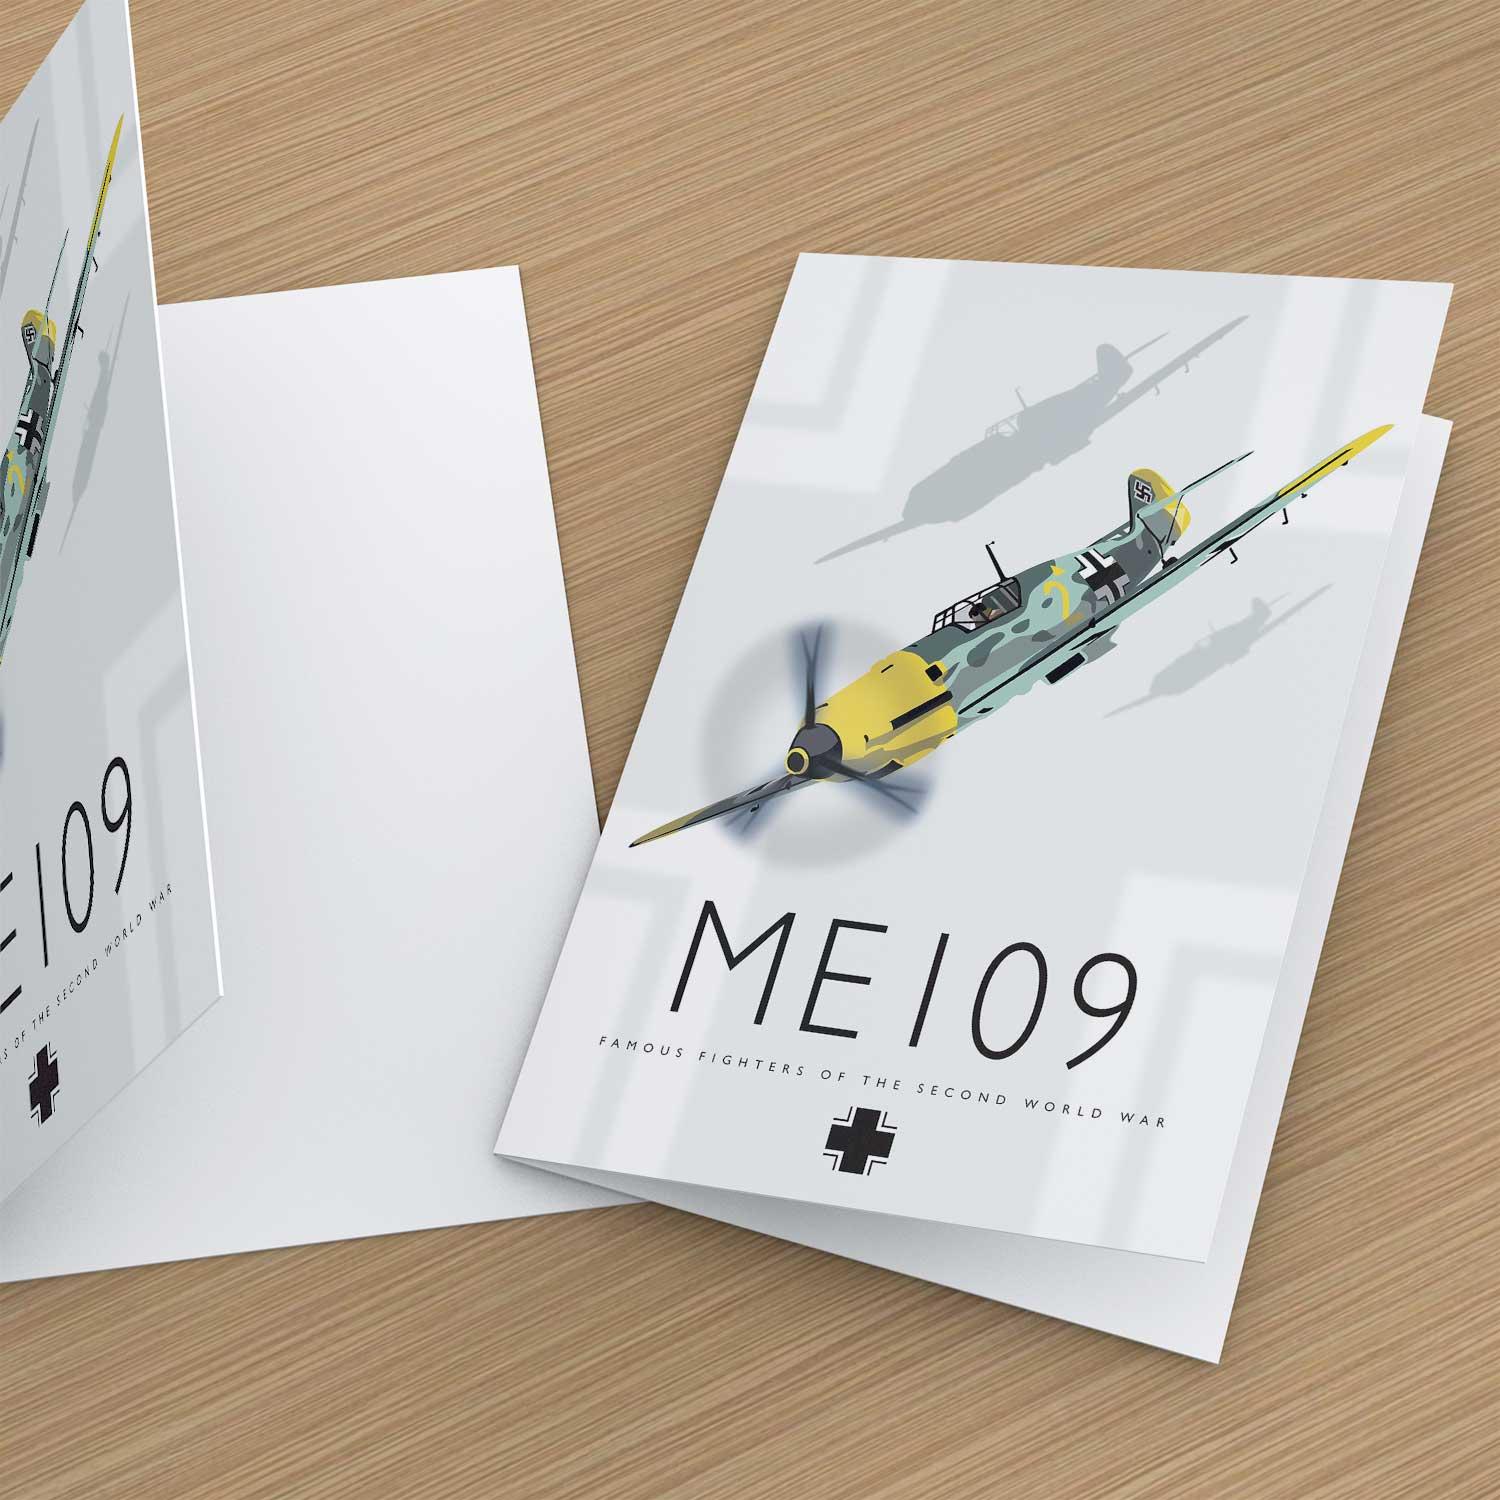 ME109 Greeting Card from an original painting by artist Peter McDermott